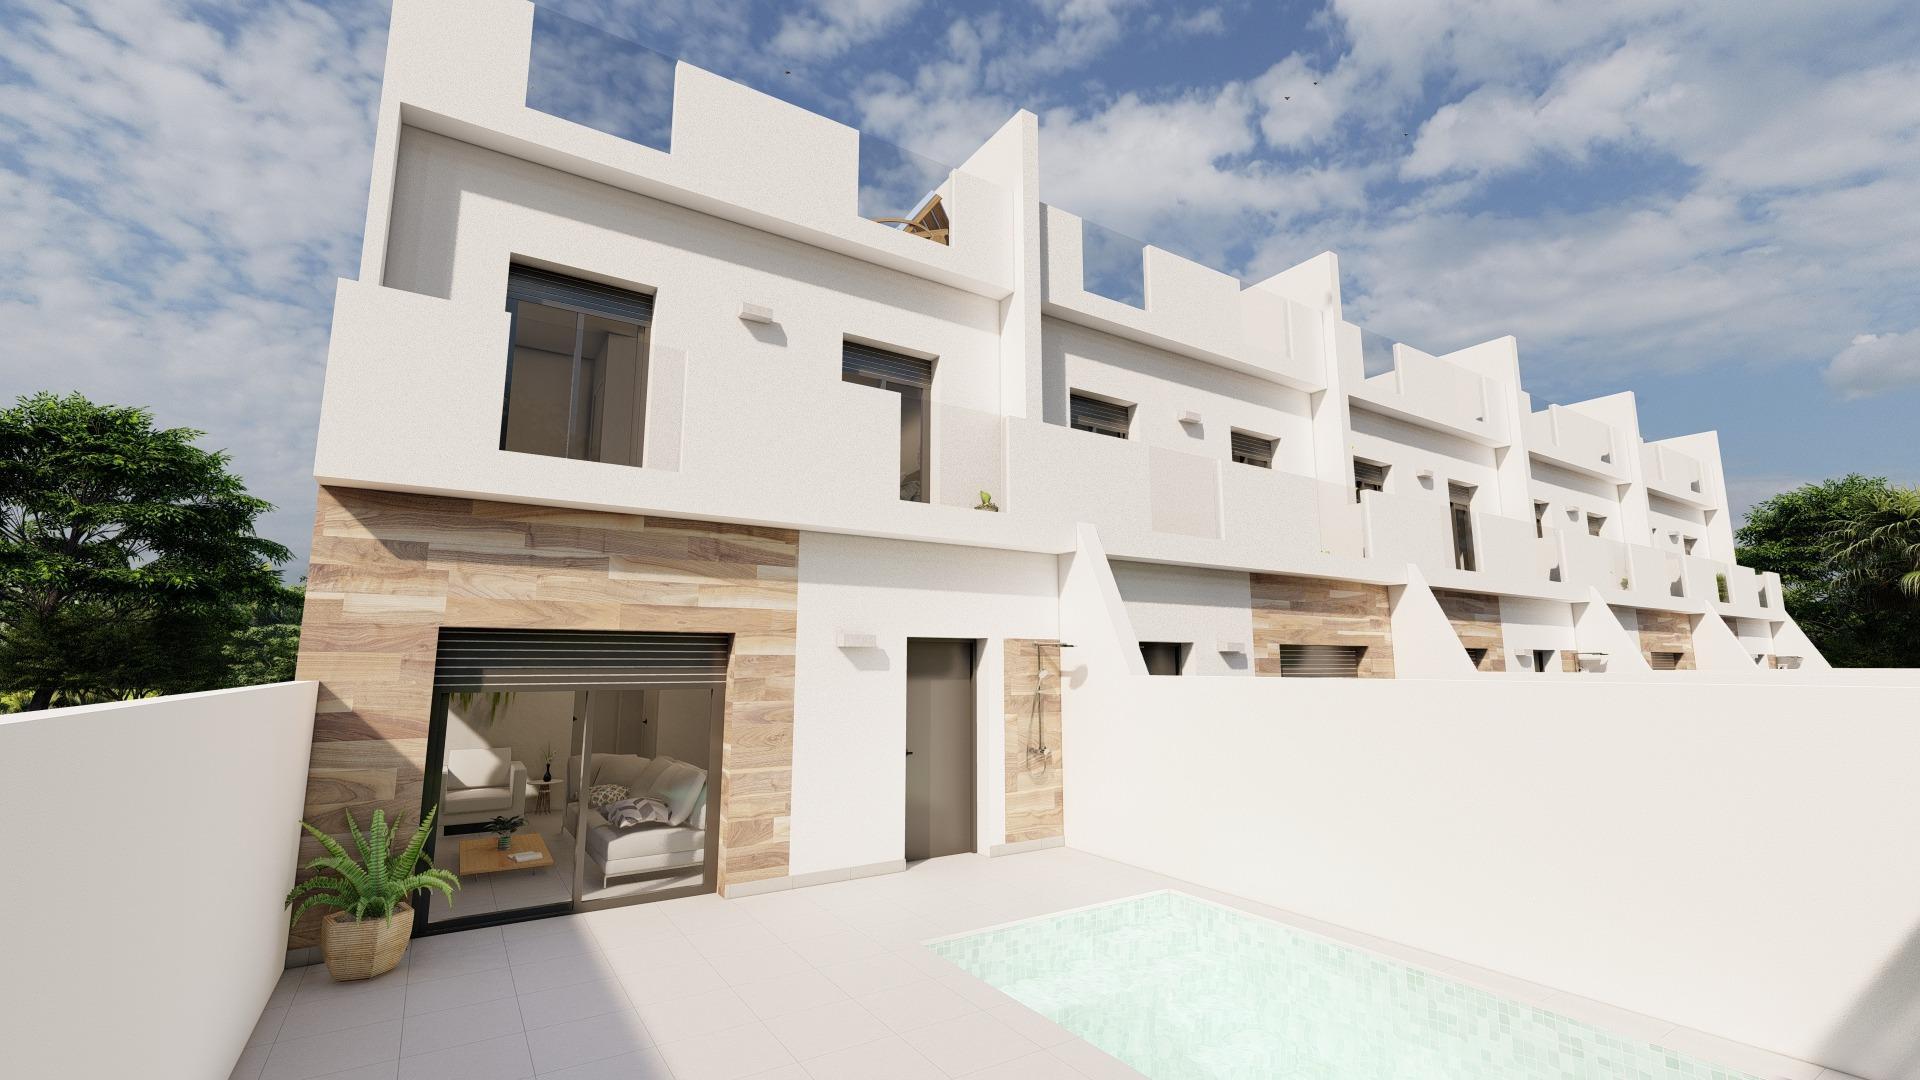 NEW BUILD TOWNHOUSES IN DOLORES DE PACHECO

New Build townhouses and semi-detached villas located in Dolores de Pacheco, Murcia. 

Each property has 3 bedrooms, 2 bathrooms, an open plan kitchen with living/dining area, front and rear terraces, solarium with Summer kitchen and private garden with the pool and parking space.

Development of 5 townhouses situated next to a park in the traditional village of Dolores de Pacheco, just 2 km from Roda Golf &amp; Beach Resort and 4 km from Los Alcázares, surrounded by services, parks, sports facilities, near several Golf Courses such as Roda Golf and La Serena Golf, plus being 5 minutes far from beach. 
The property will meet the highest standards and will be equipped with perfect for a holiday home or all year round living in the sun.